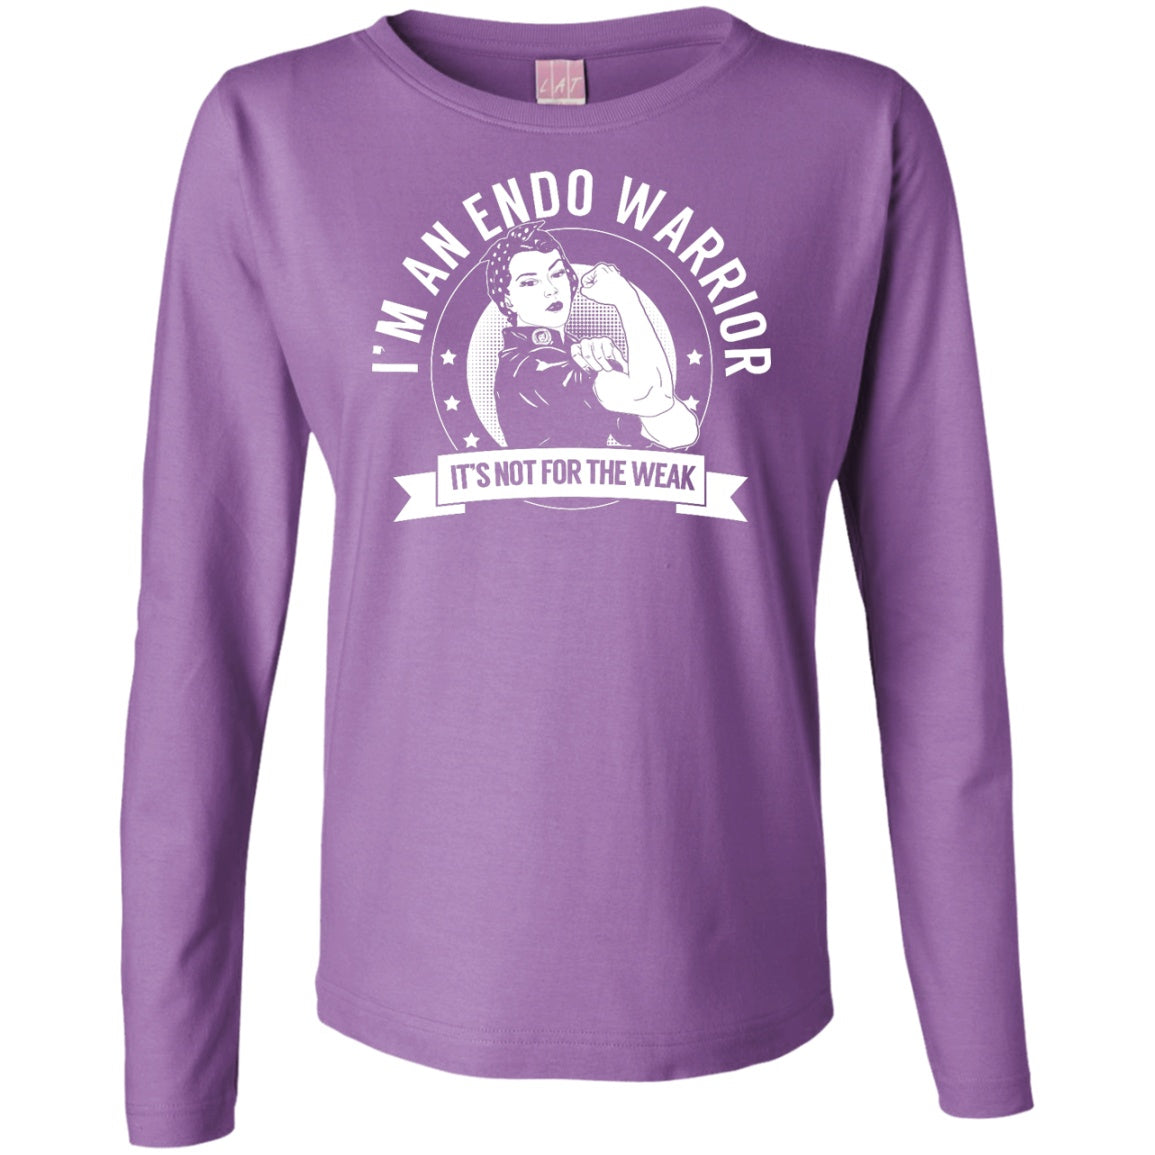 Endometriosis - Endo Warrior Not For The Weak Womens Long Sleeve Shirt - The Unchargeables